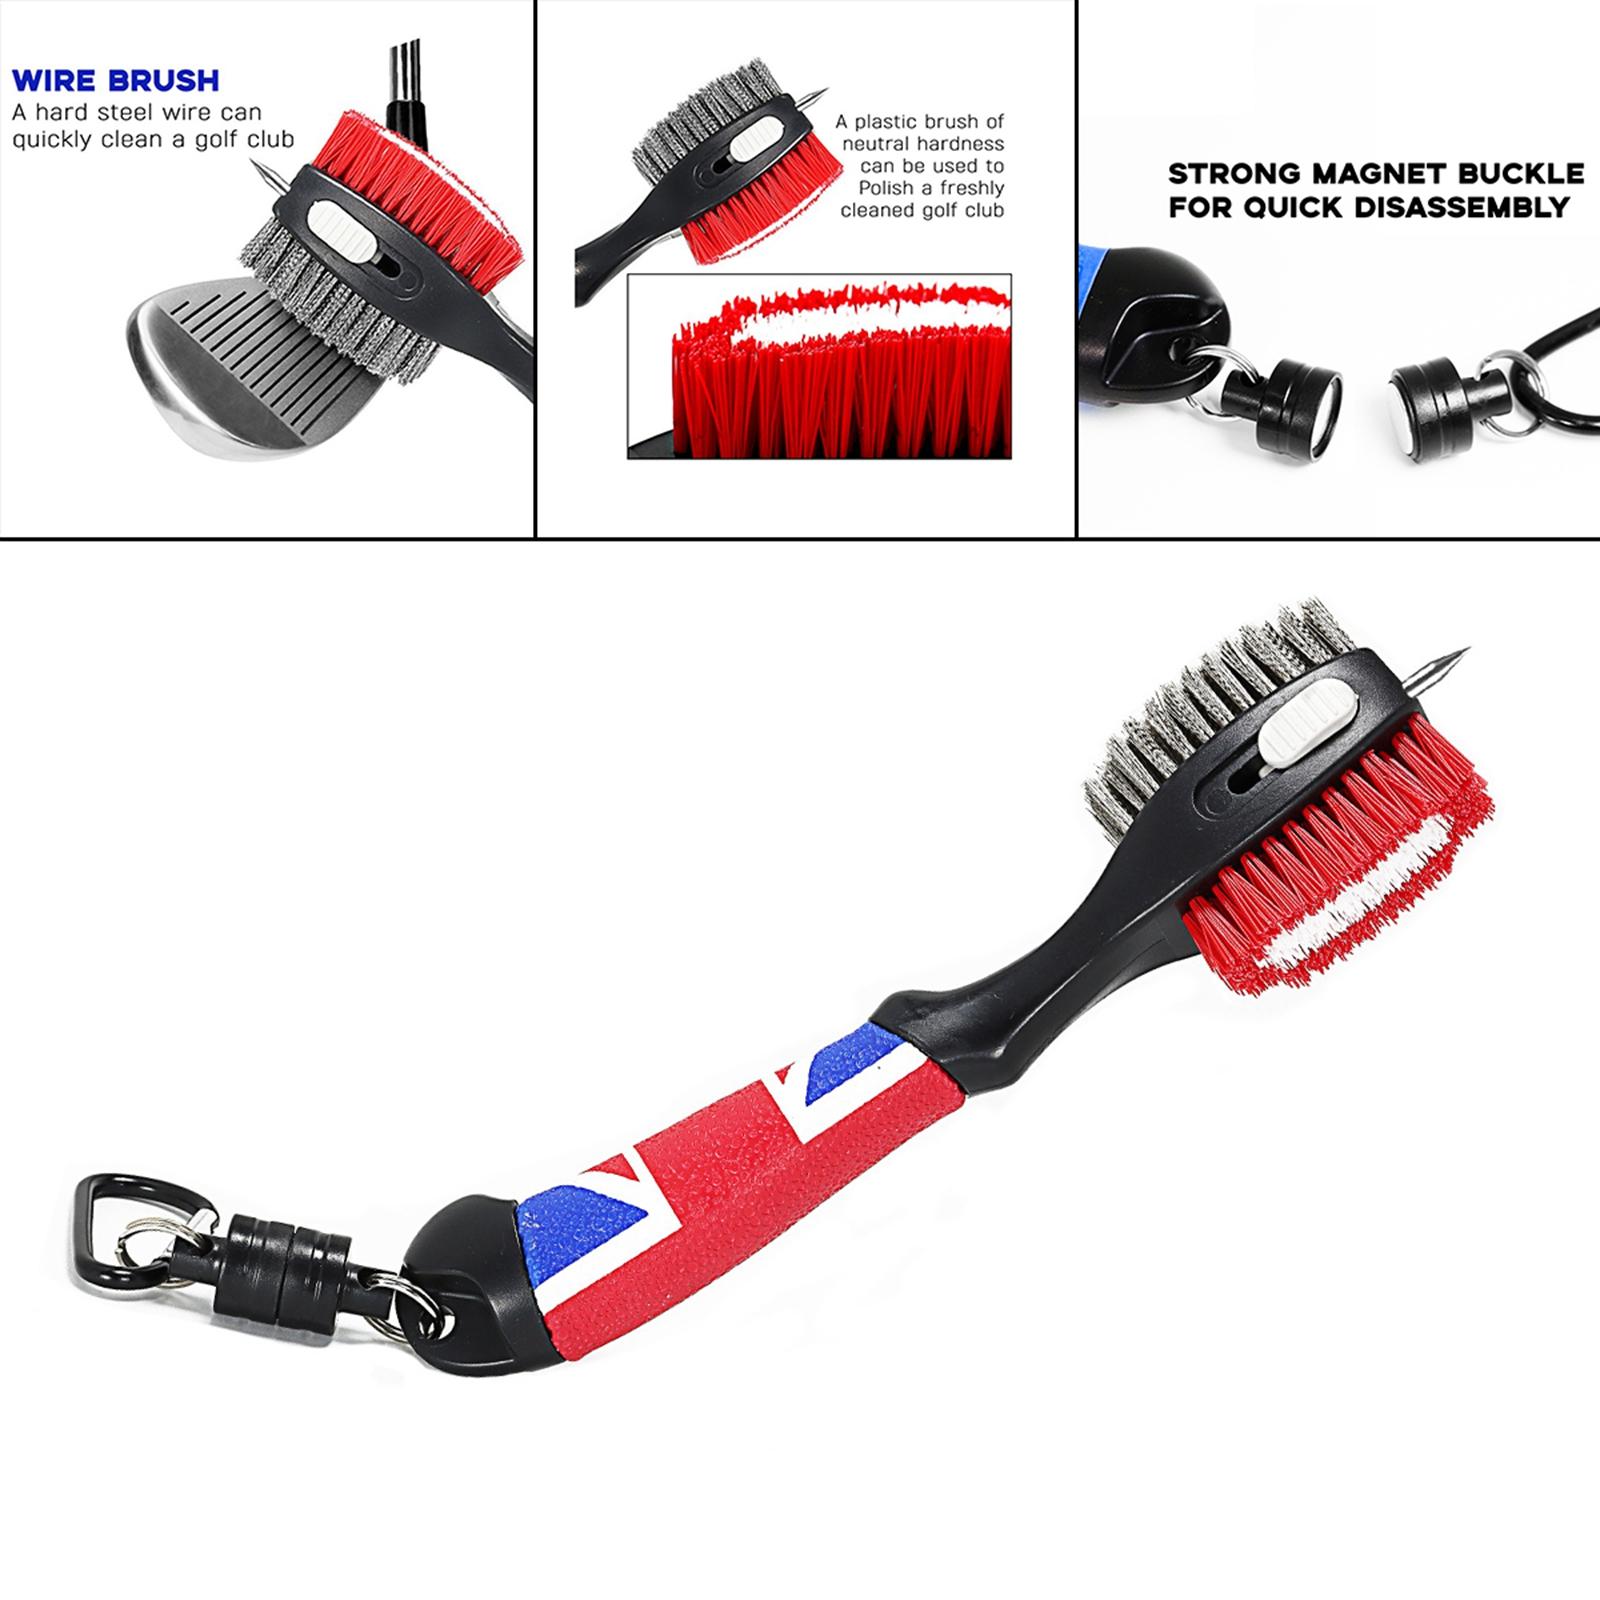 Golf Cleaner Retractable Brush Training Supplies with Carabiner for Women British flag